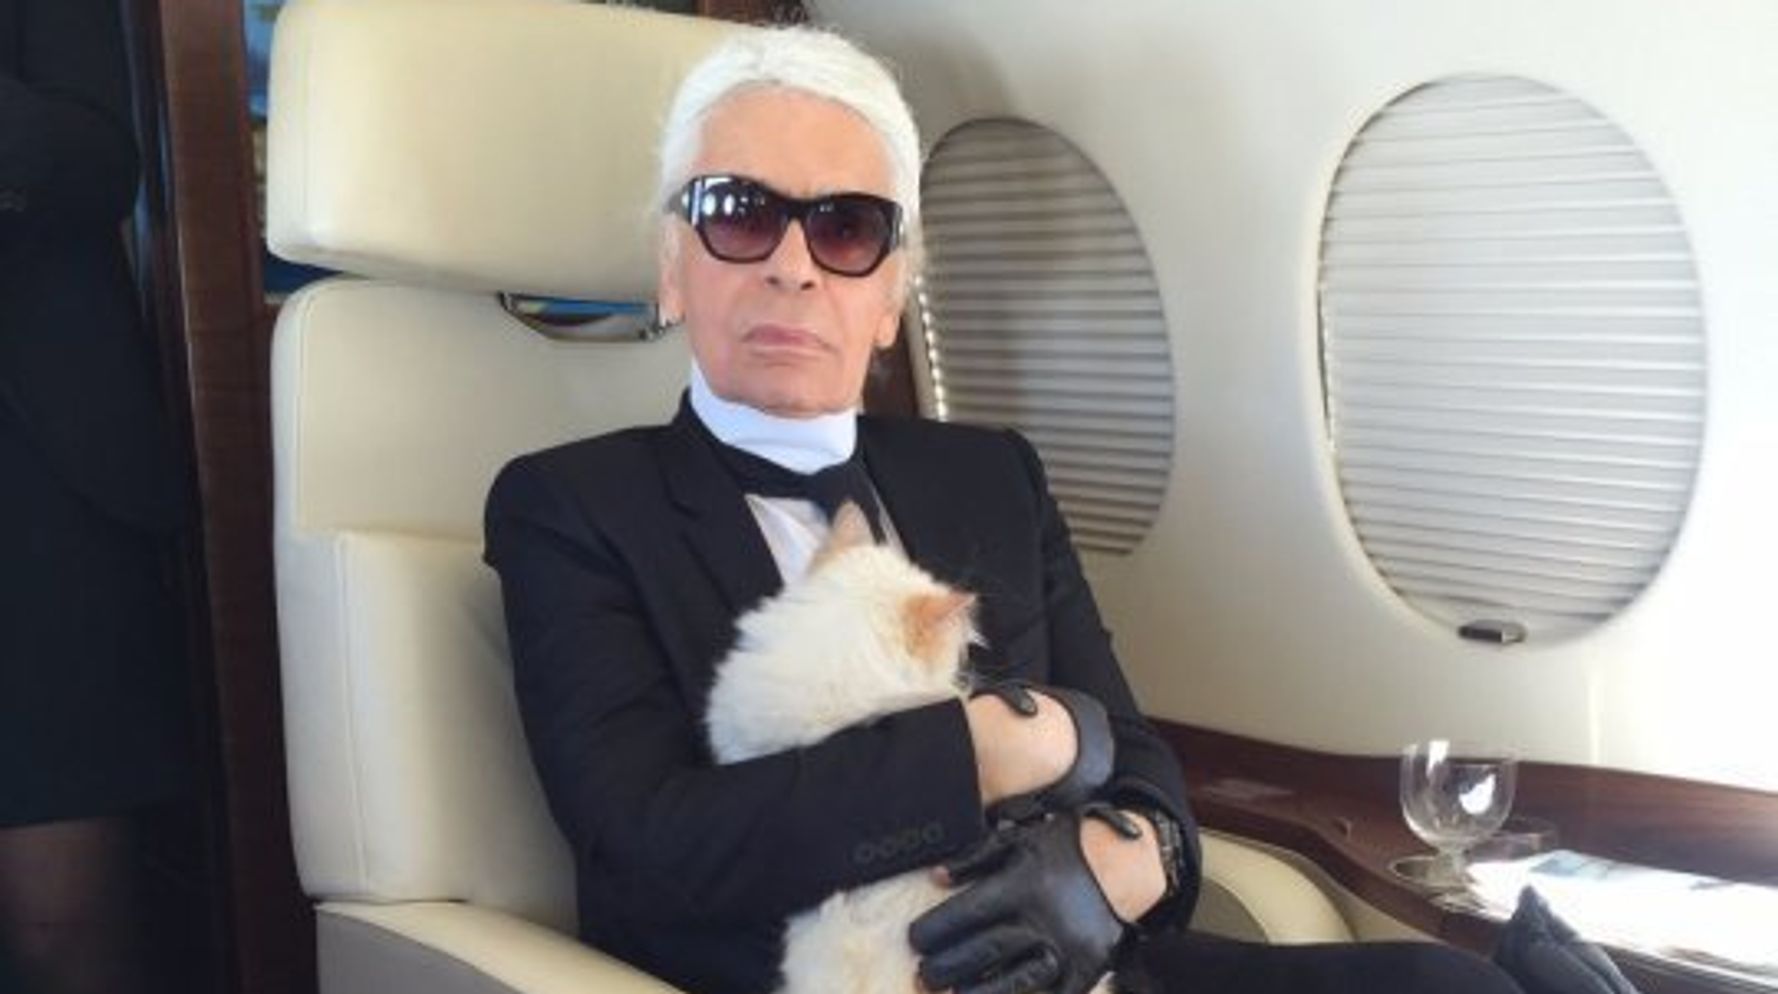 Karl Lagerfeld's cat Choupette has landed a pet furniture collaboration